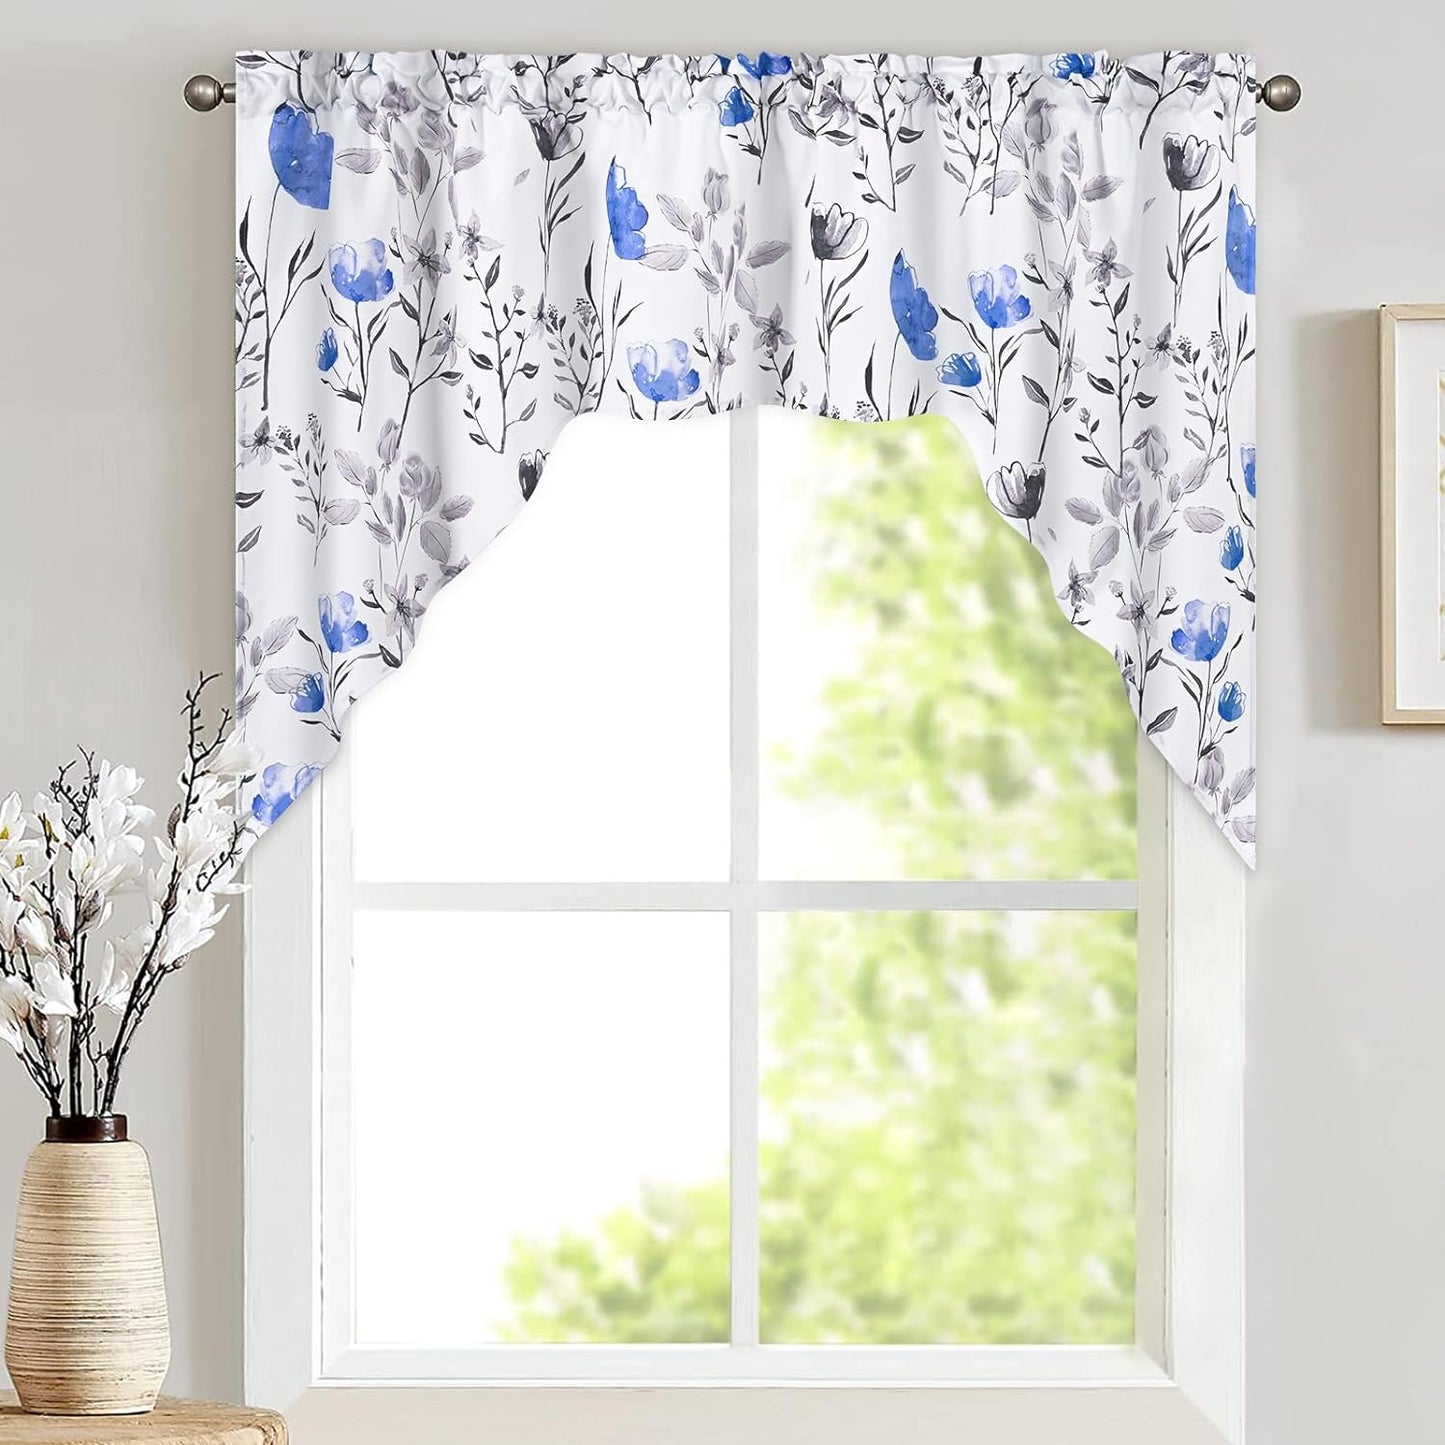 Likiyol Floral Kithchen Curtains 36 Inch Watercolor Flower Leaves Tier Curtains, Yellow and Gray Floral Cafe Curtains, Rod Pocket Small Window Curtain for Cafe Bathroom Bedroom Drapes  Likiyol Blue 36"L X 60"W 